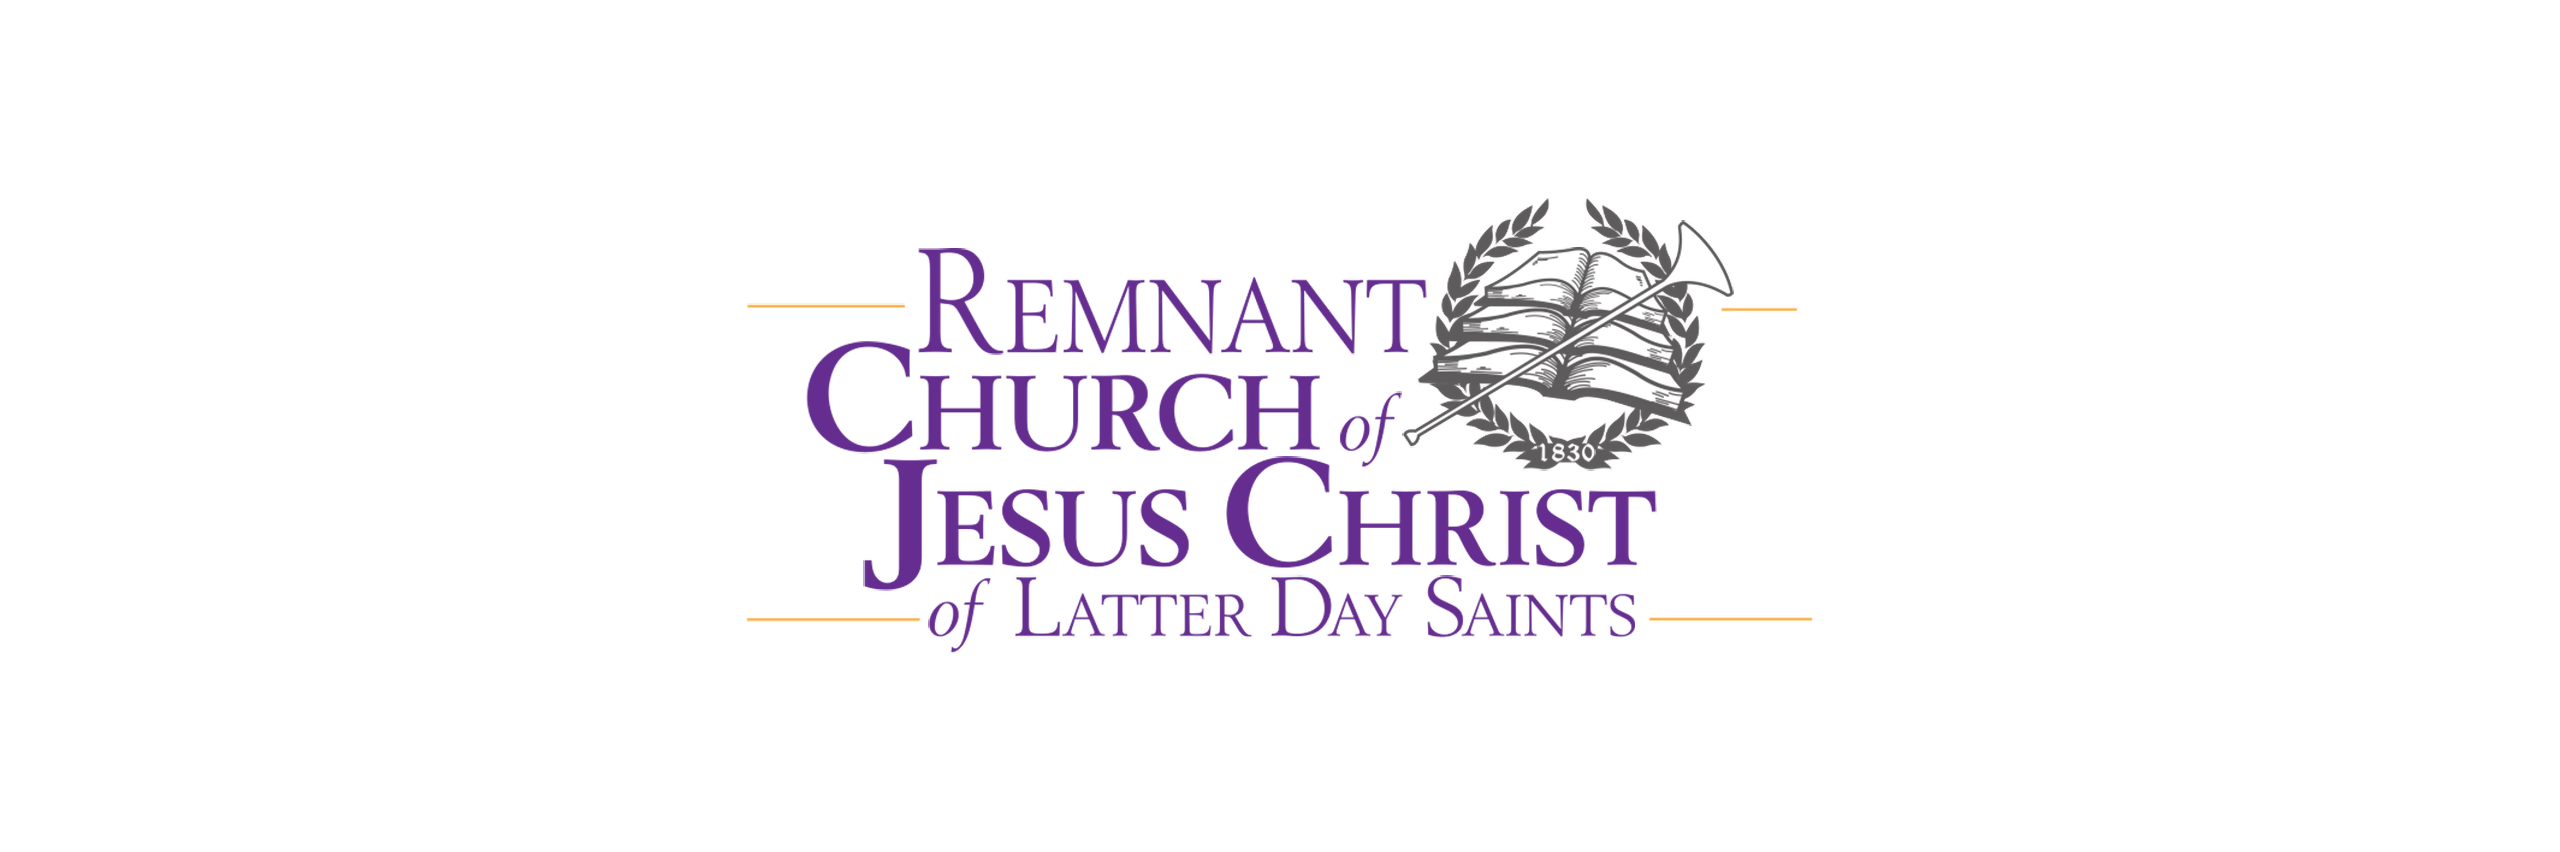 Remnant Church Member Channel